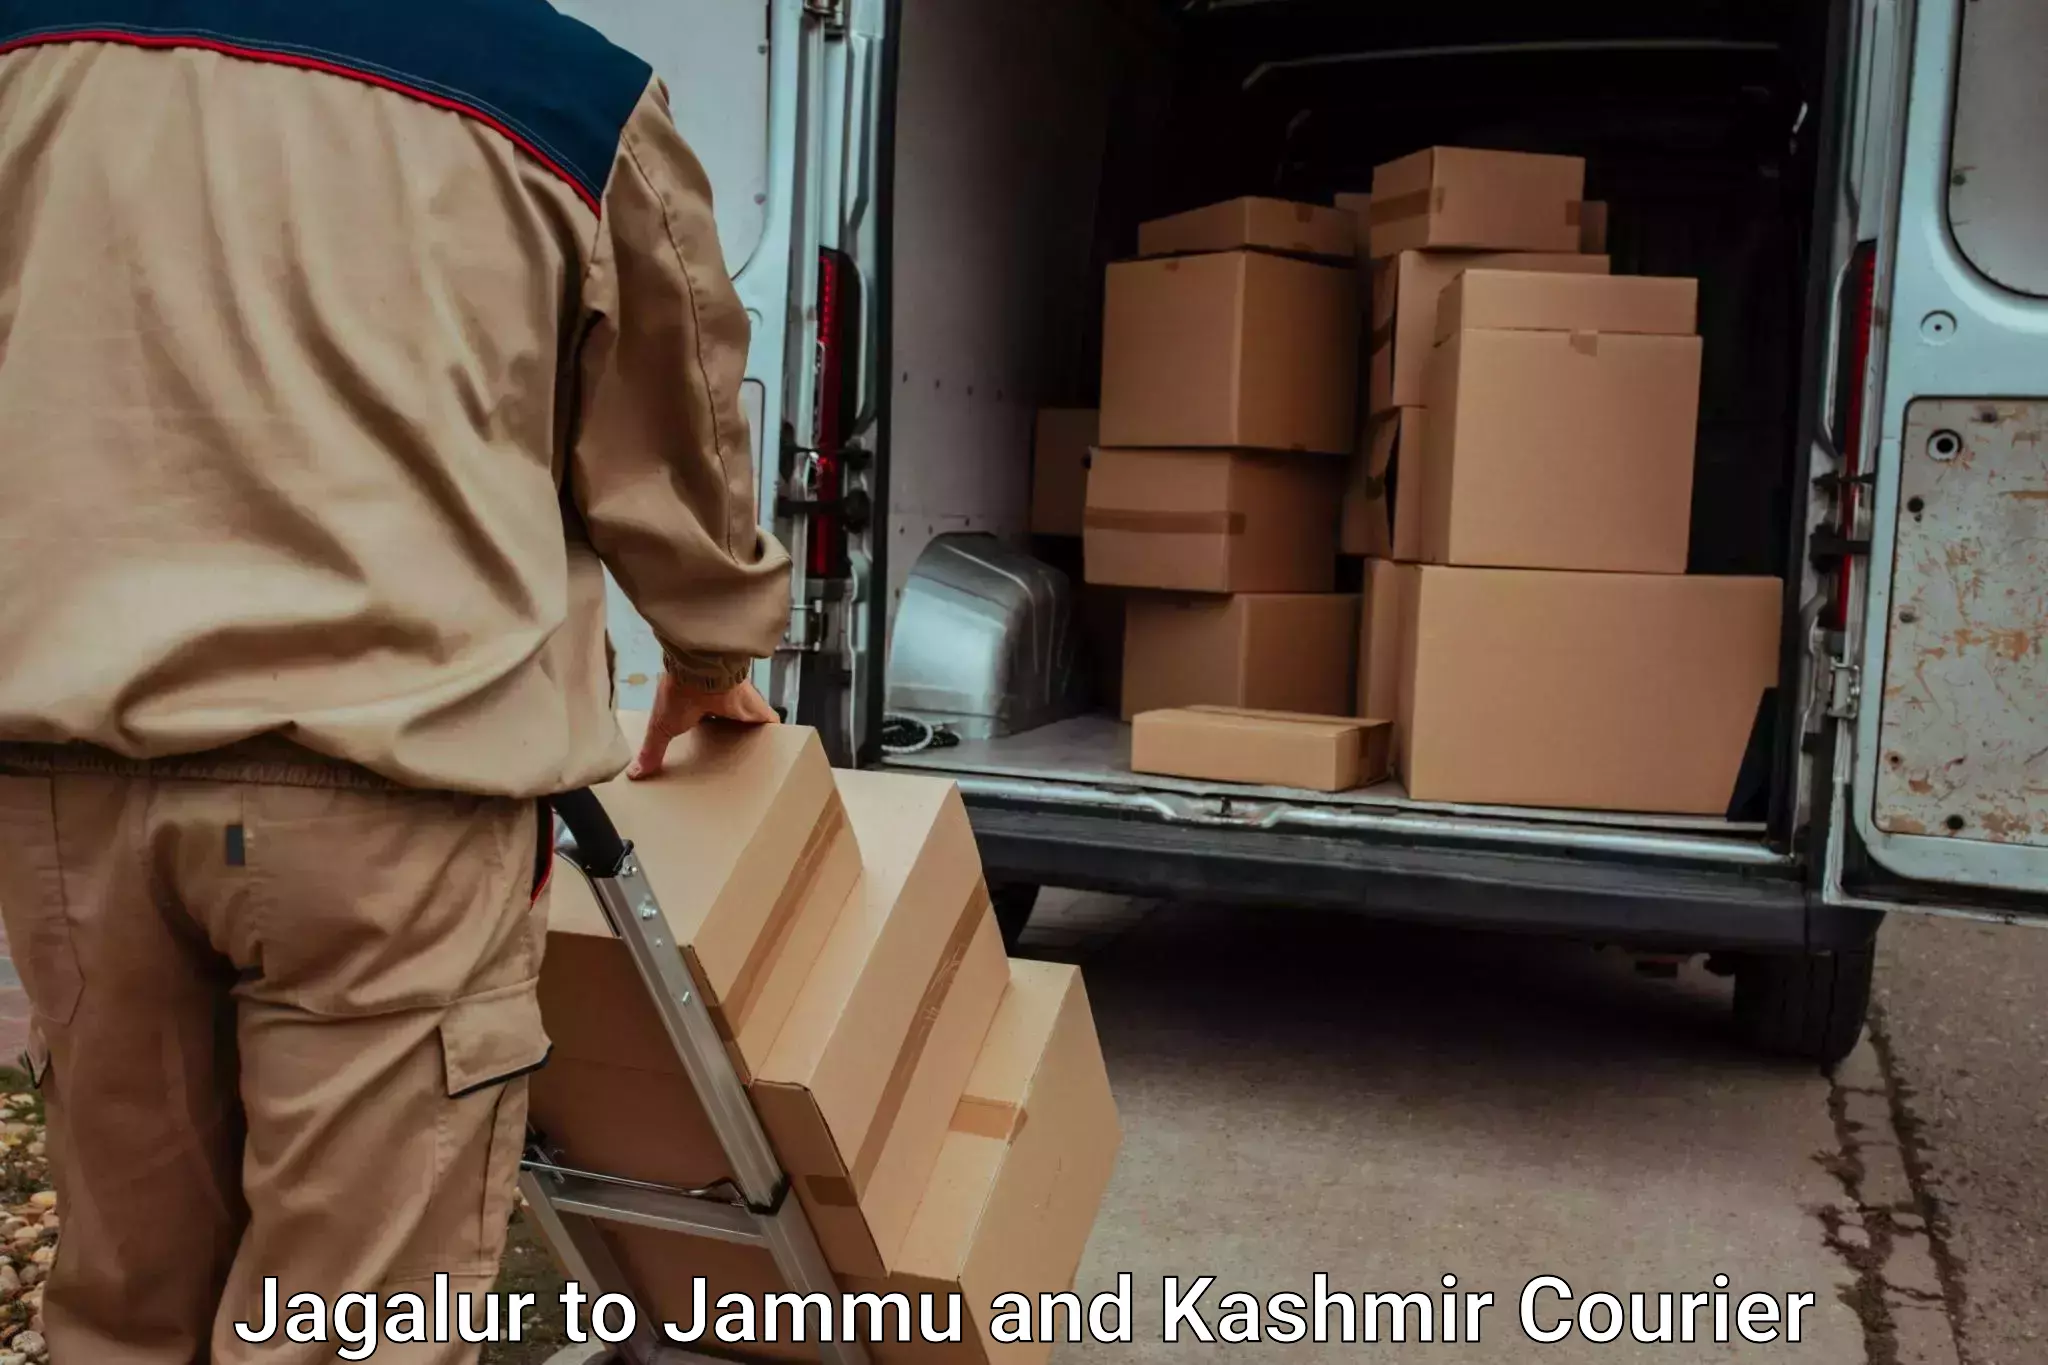 Luggage shipment processing in Jagalur to Jammu and Kashmir